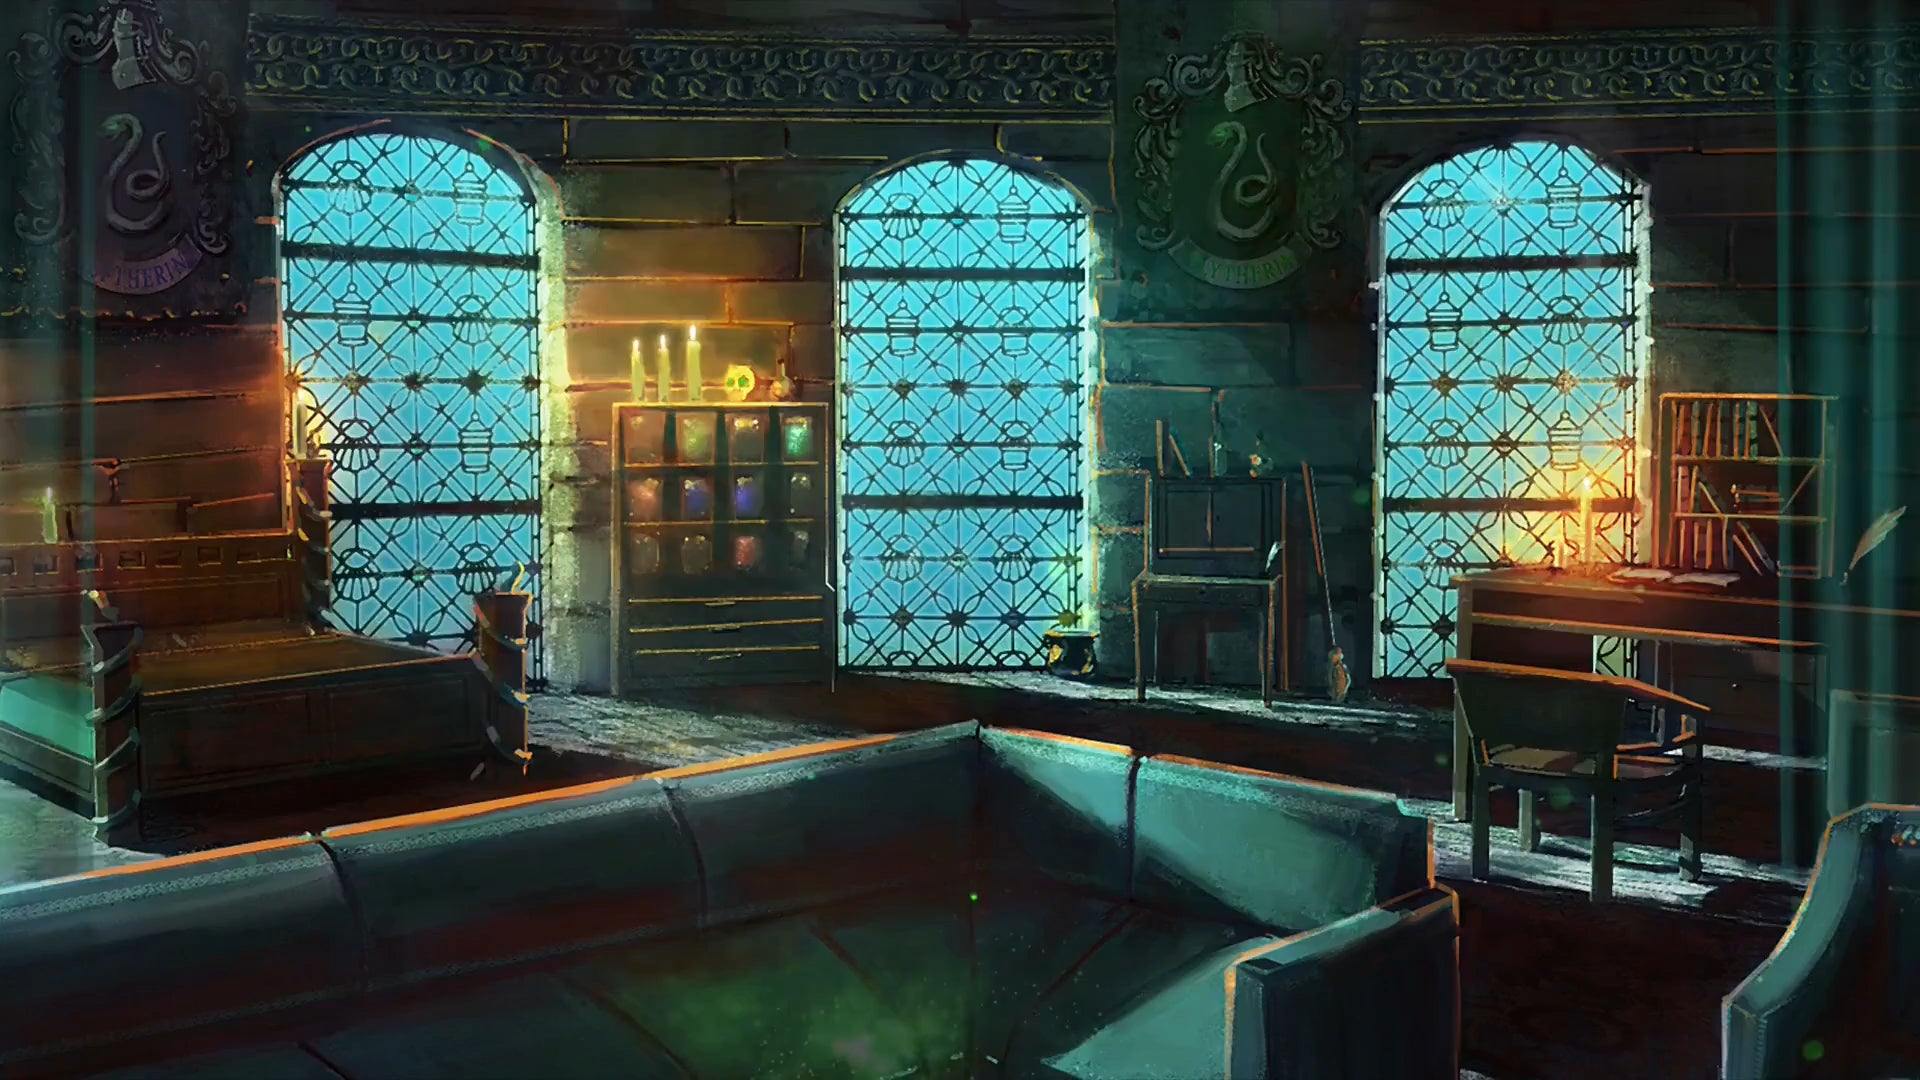 I Hope To See Common Rooms With Faithful And Unique Designs. Imagine The Underwater Slytherin Dungeon, Relaxing Sound Of Swishing Water, The Merpeople Giant Squid Appearing At The Windows